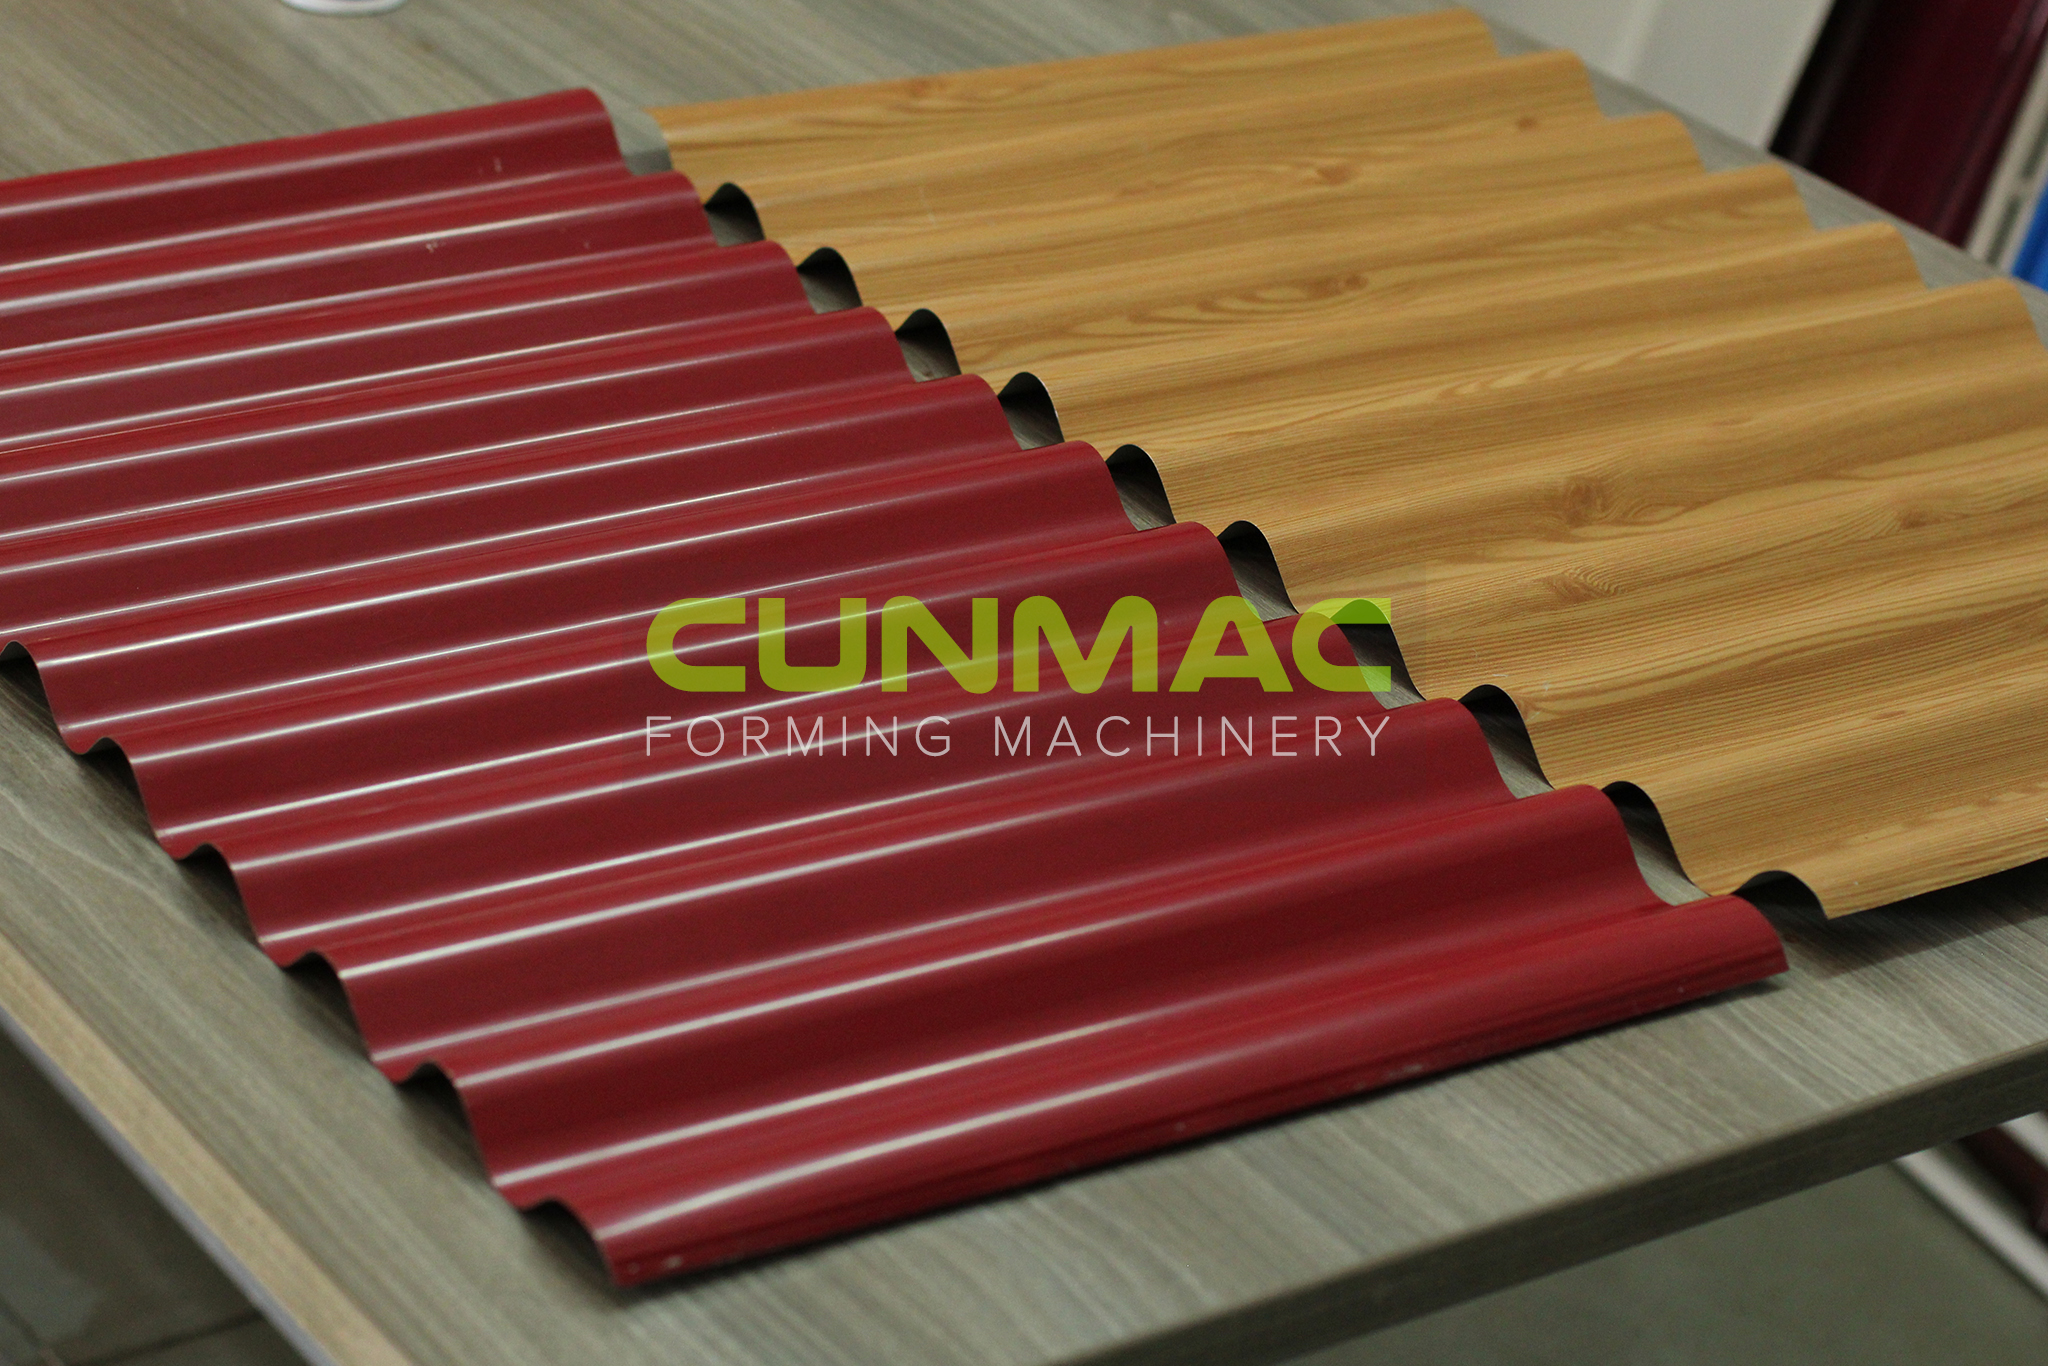 Material thickness: 0.15 - 0.6mm (G300 - G550)